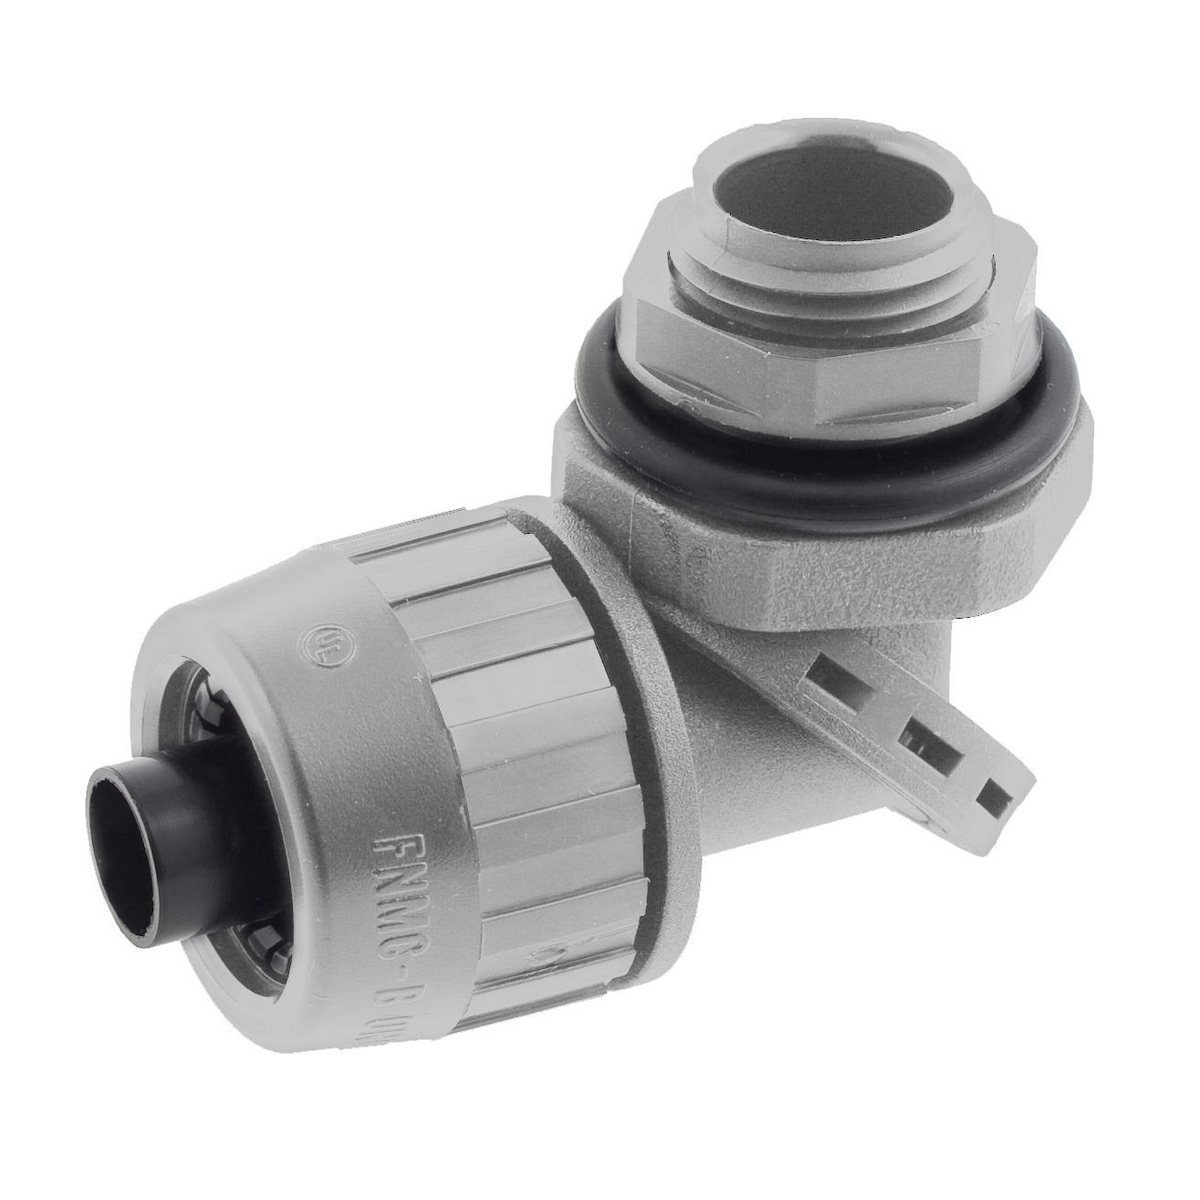 PS0509NGY Hubbell Liquid Tight SwivlLok Fitting, 1/2' Conduit Fitting 1